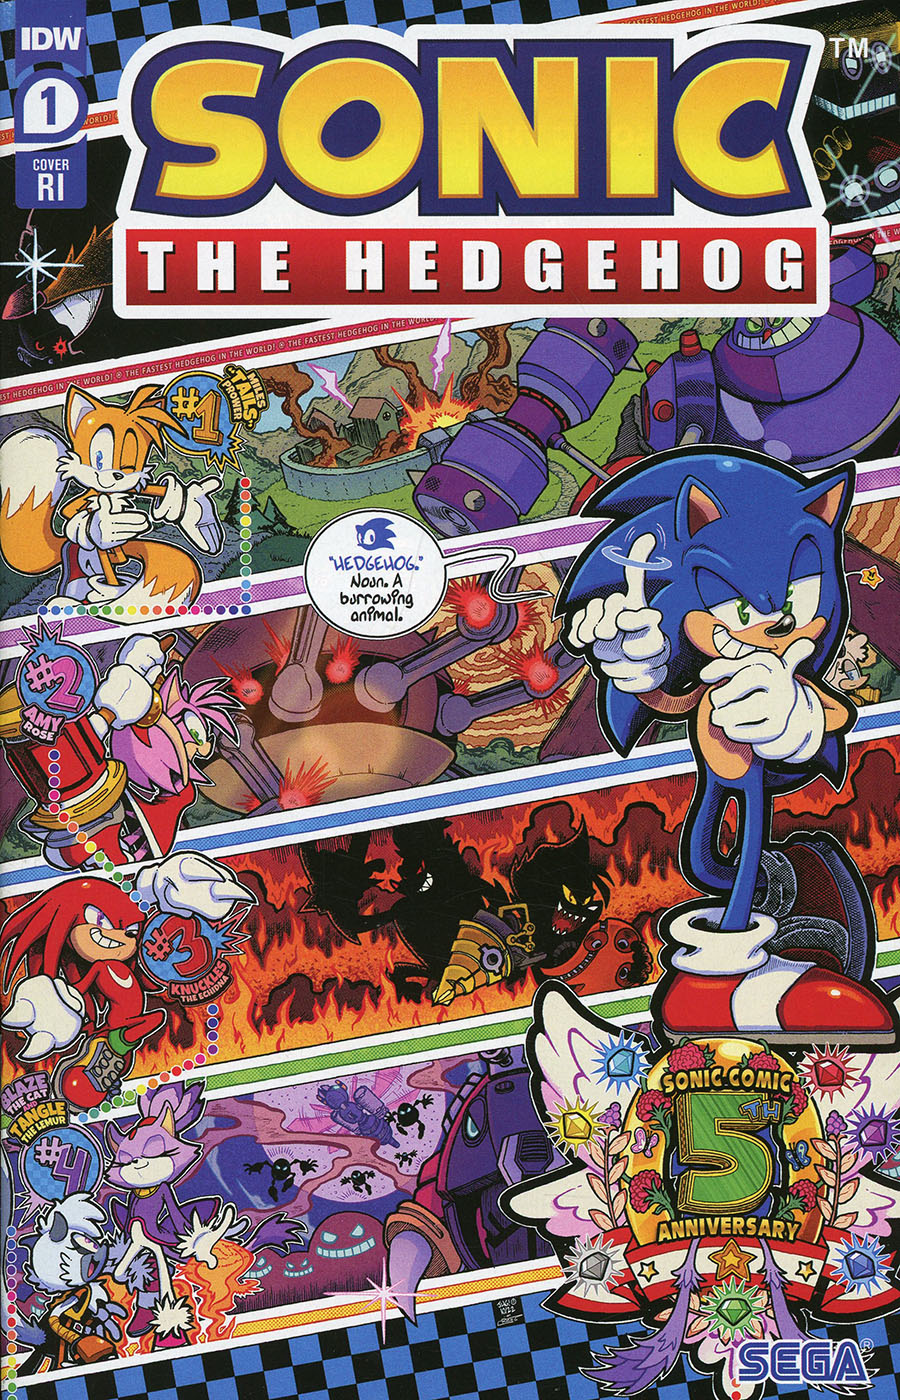 Sonic The Hedgehog Vol 3 #1 5th Anniversary Edition Cover G Incentive Jonathan Gray Variant Cover